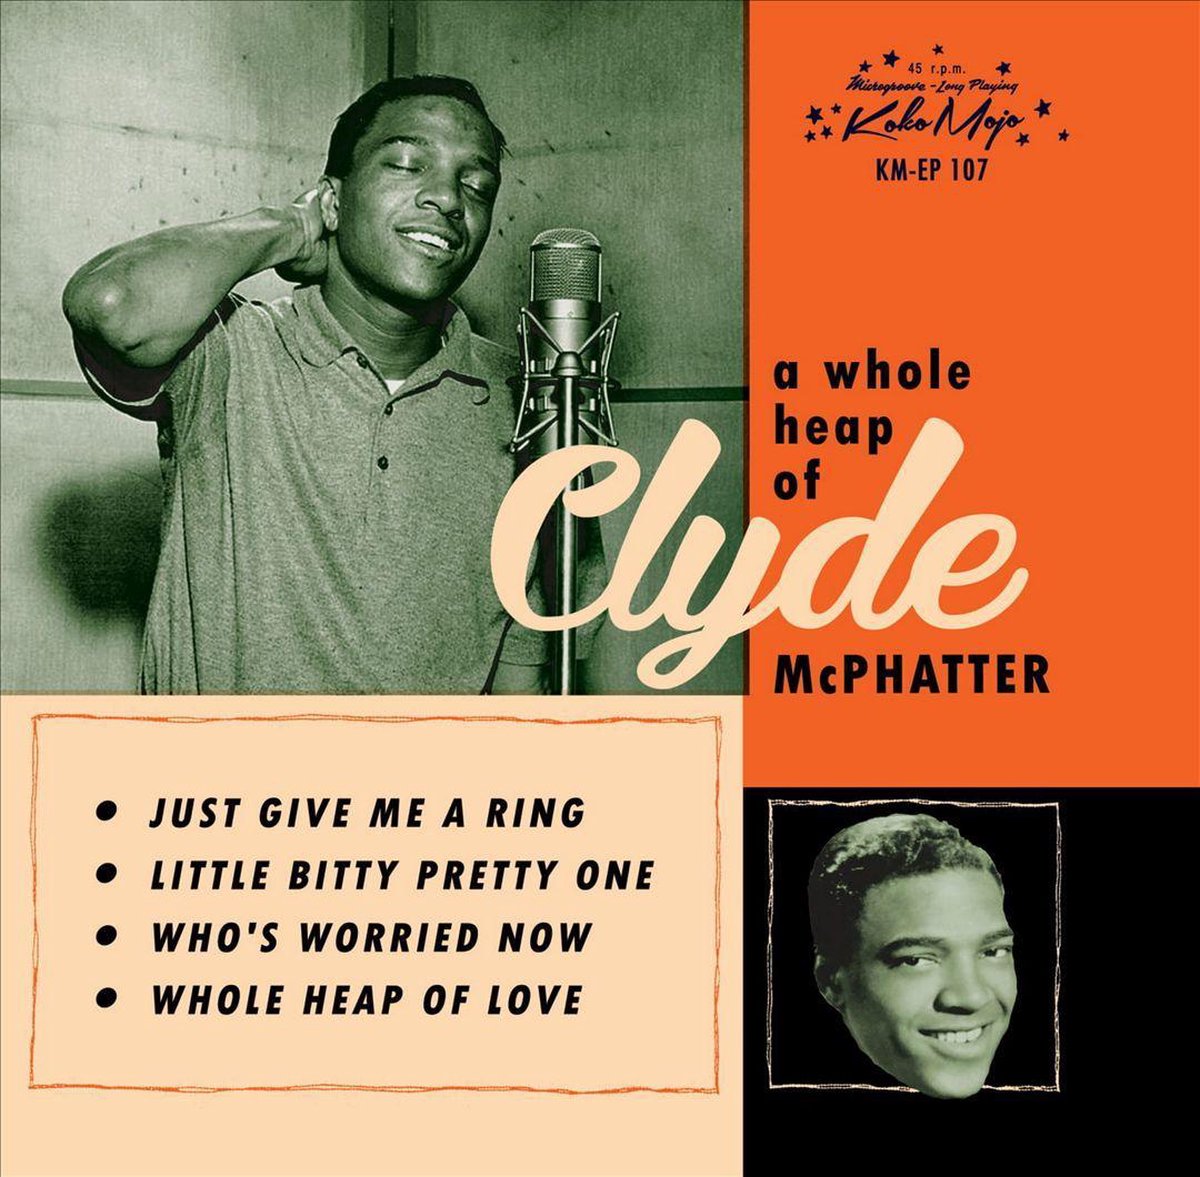 7-a Whole Heap Of - Clyde Mcphatter